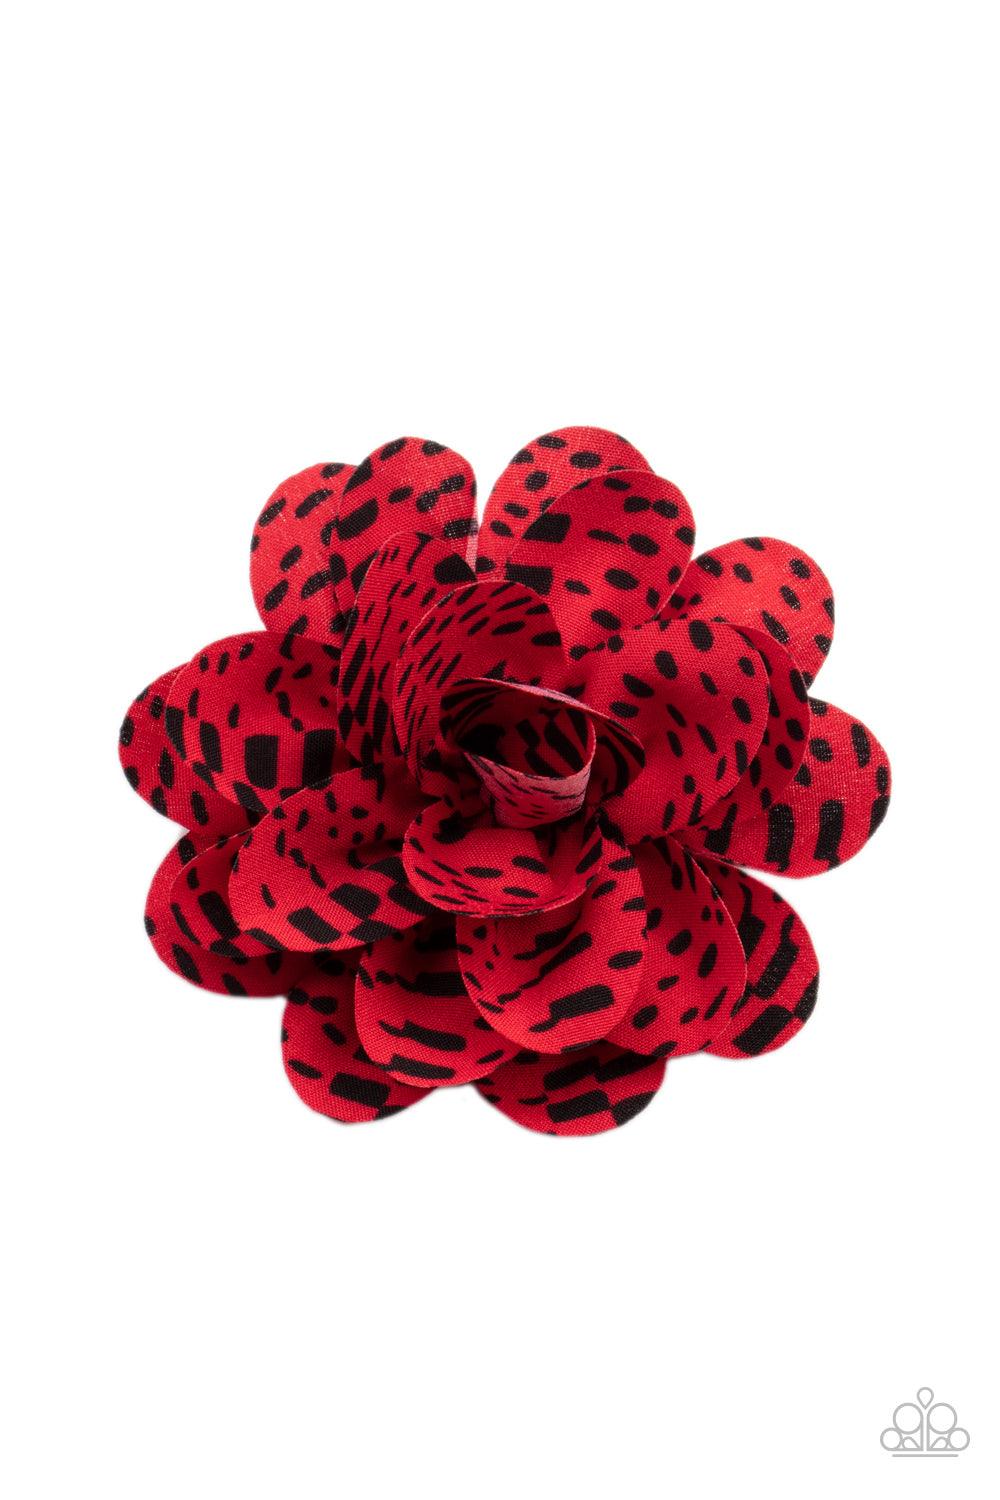 Patterned Paradise Red Hair Bow - Jewelry by Bretta